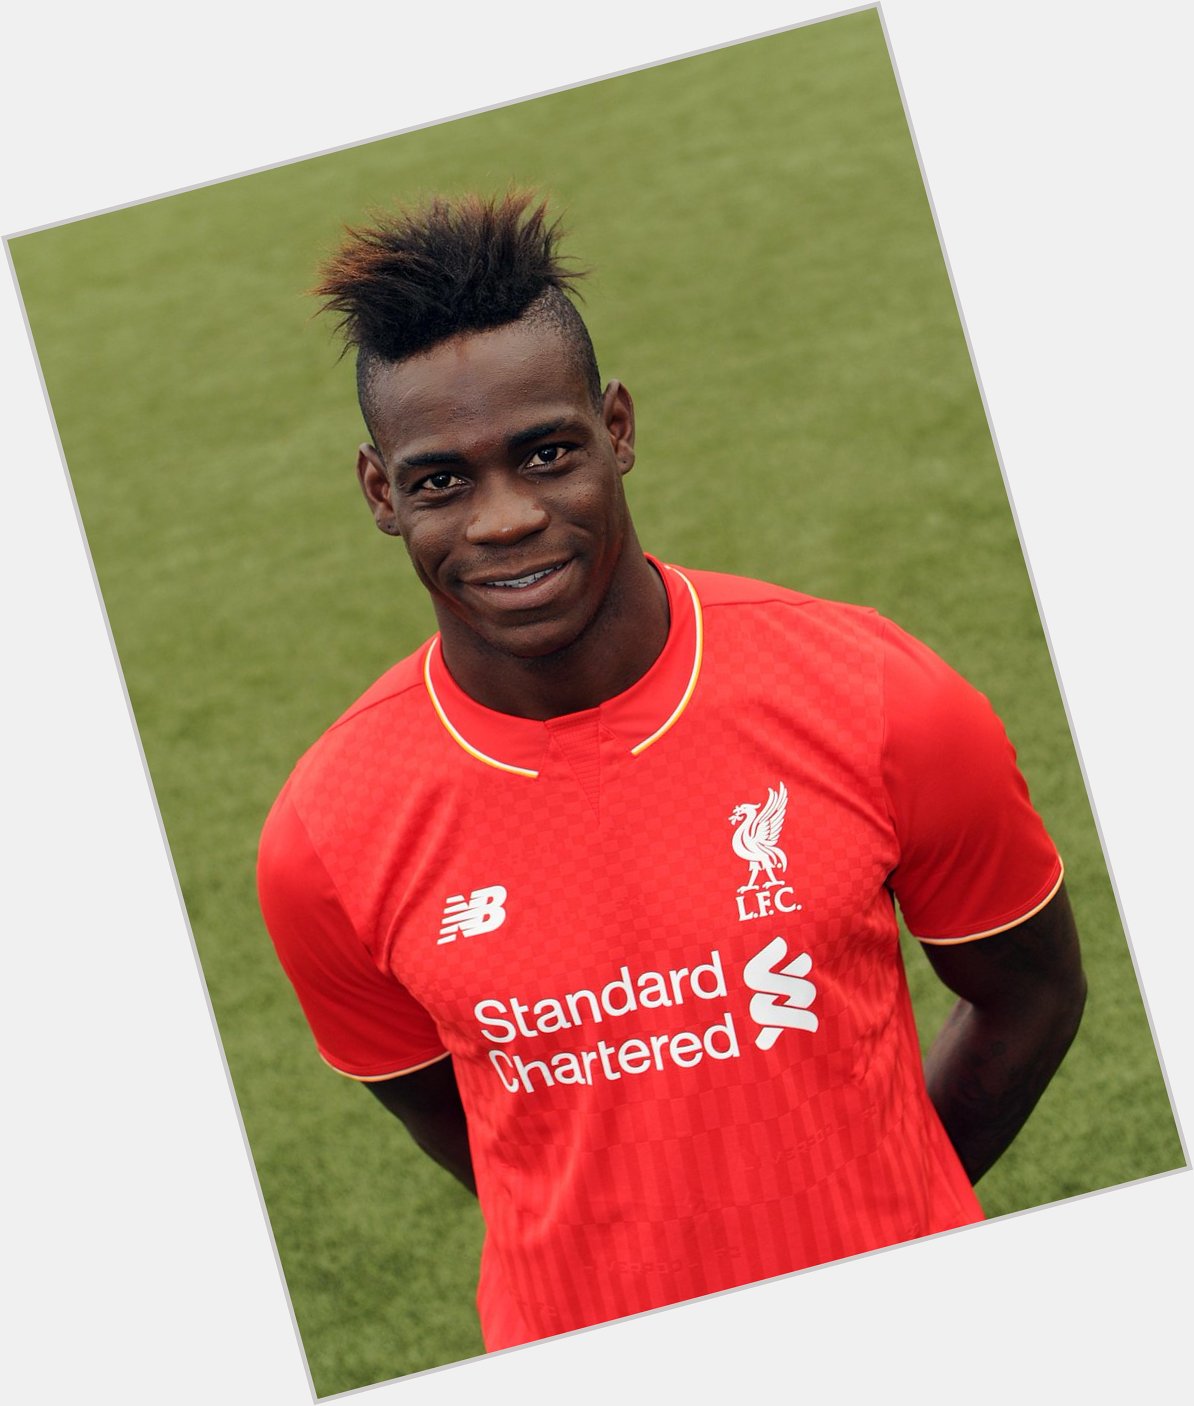 Still have plenty of time to prove for Liverpool -> Happy Birthday Mario Balotelli, 25 today  